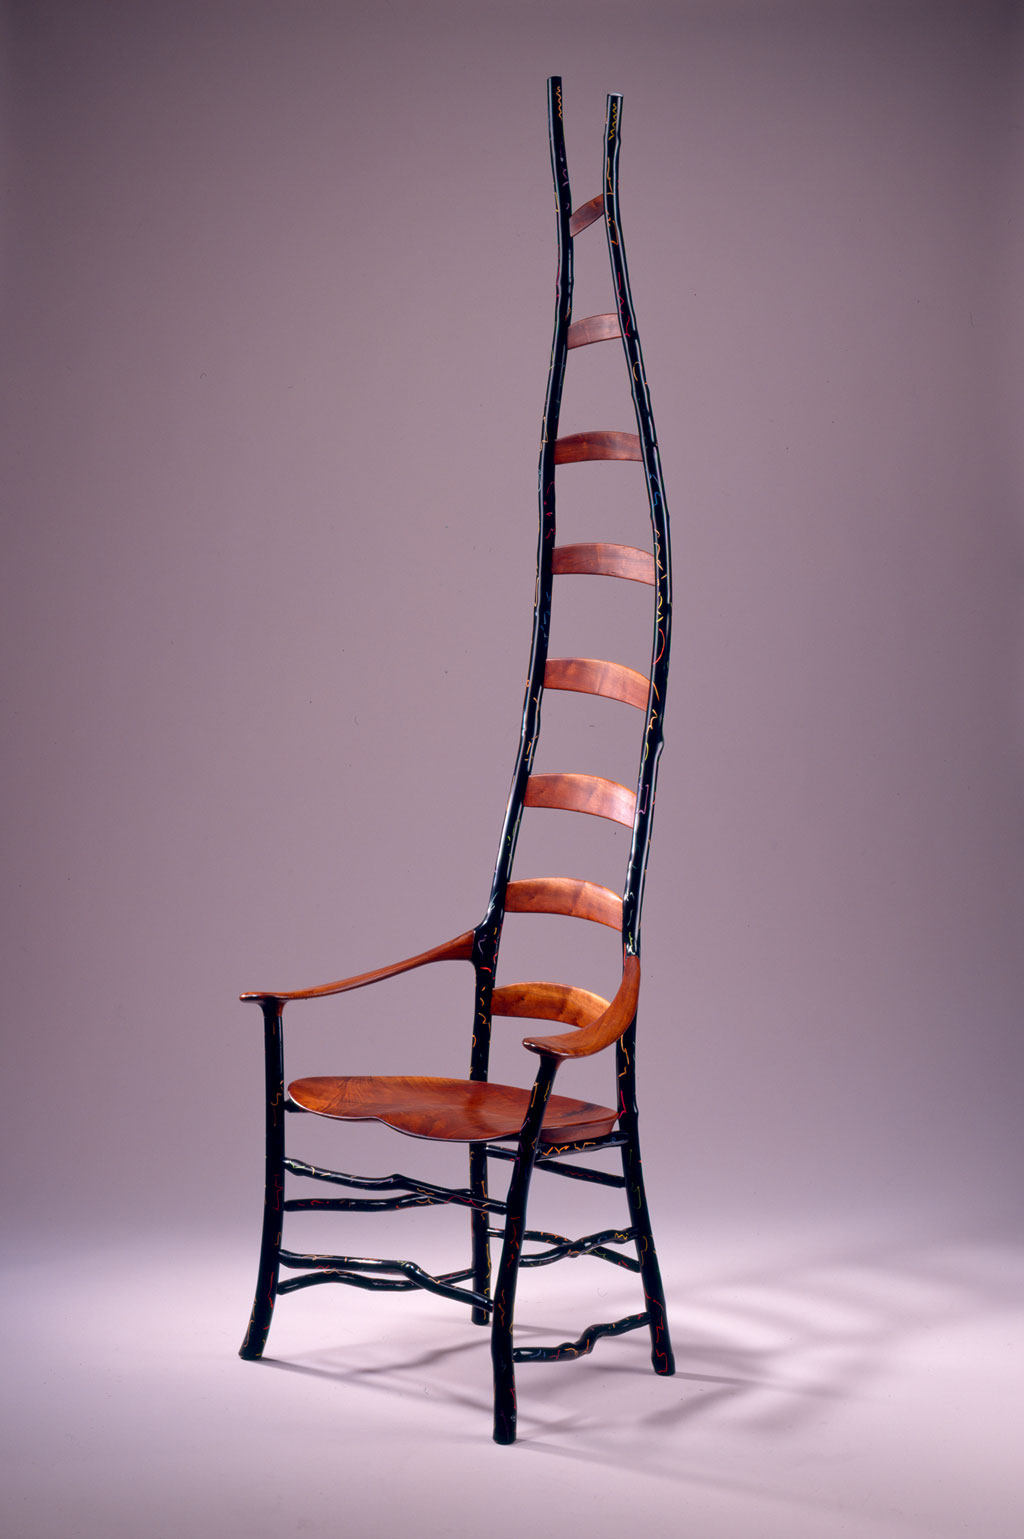 Jon Brooks, Ladderback Chair, 1996. Courtesy of San Francisco Museum of Craft and Design, The Bennett Collection, M. Lee Fatherree photograph